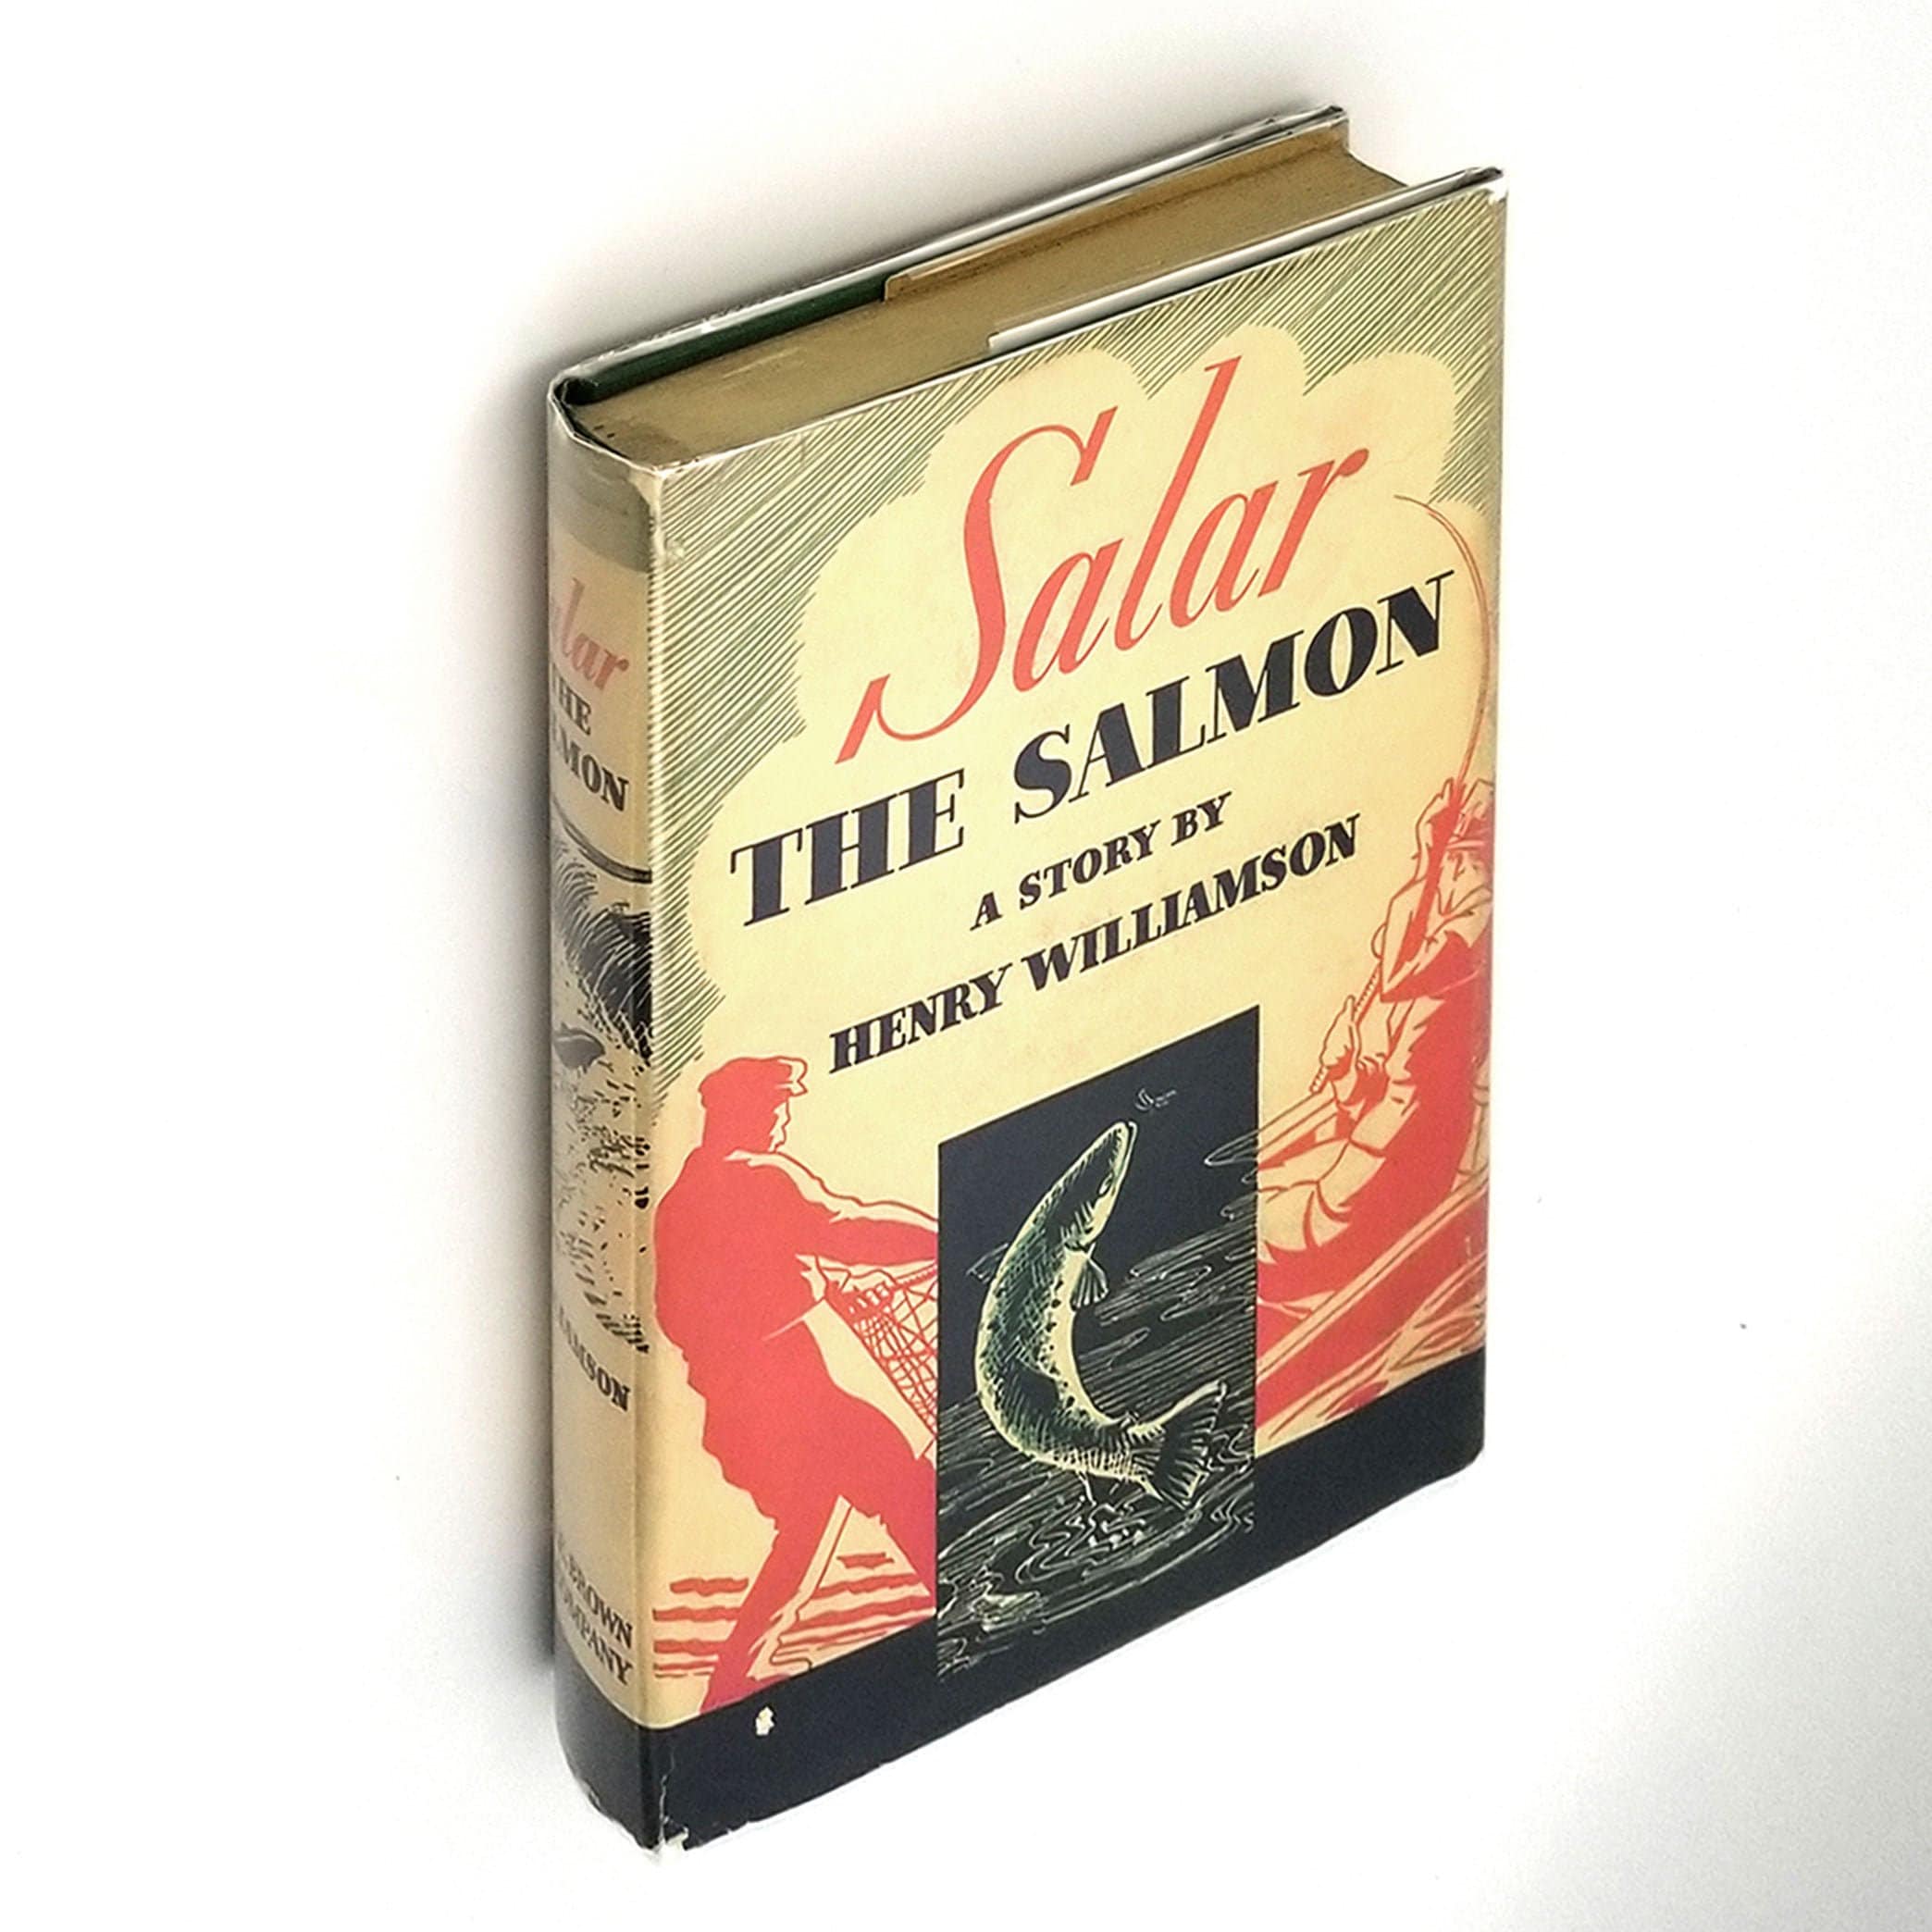 Salar the Salmon Hardcover in Dust Jacket 1938 by Henry Williamson